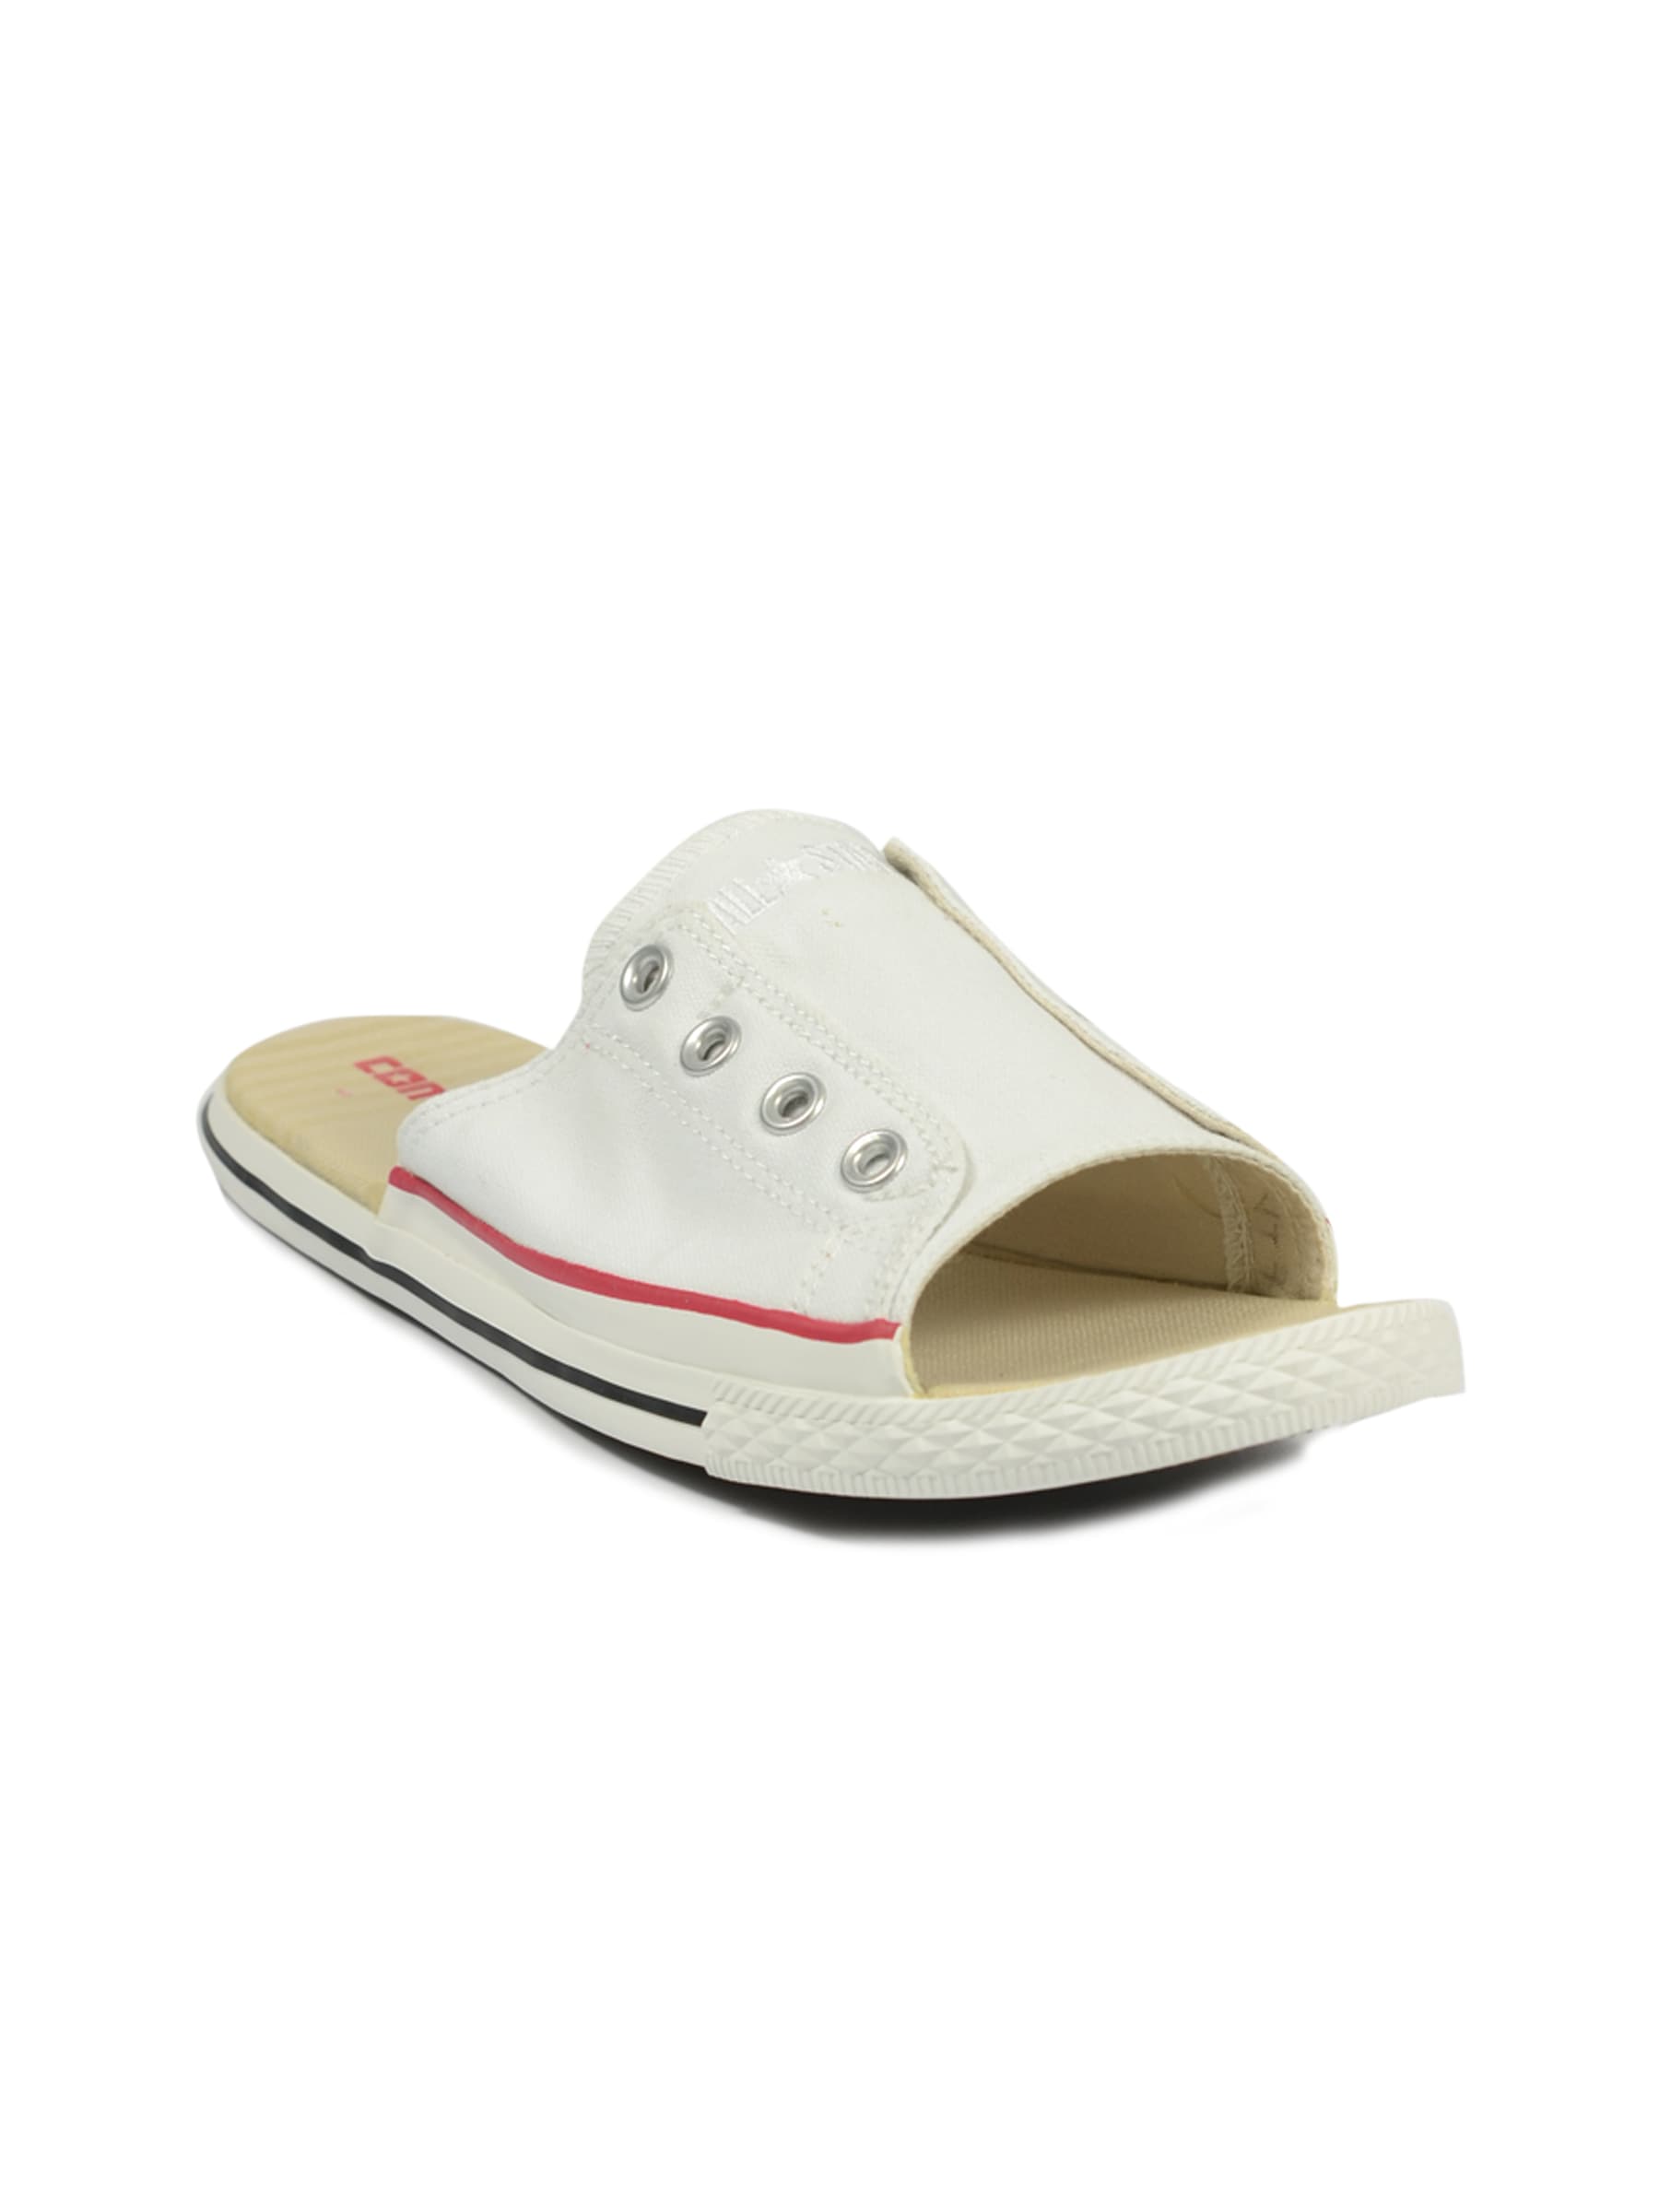 Converse Unisex As Chucks White Floater